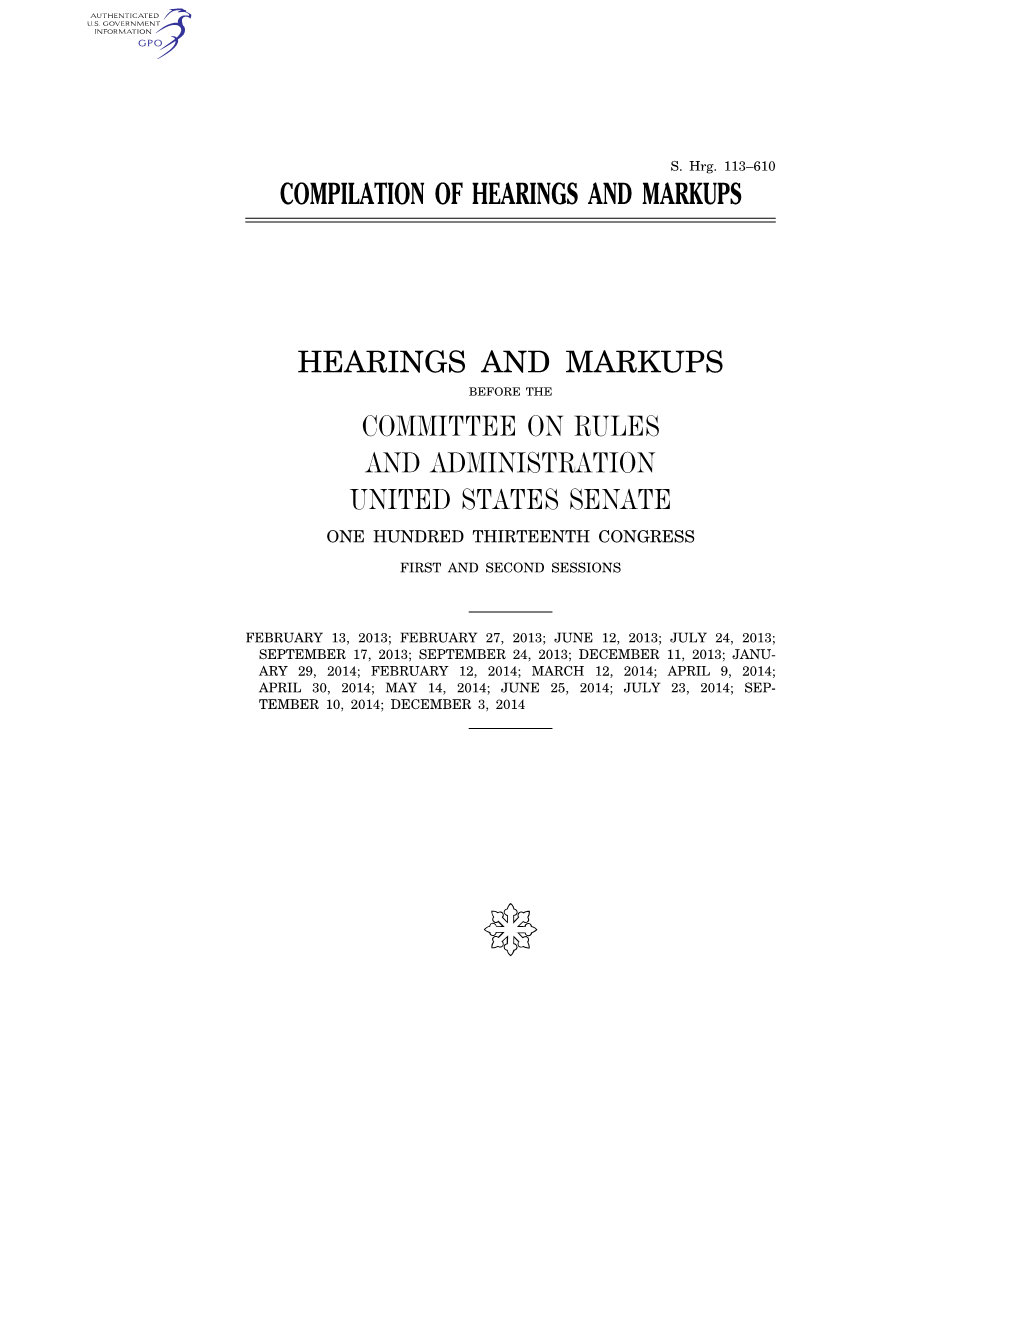 Compilation of Hearings and Markups Hearings And